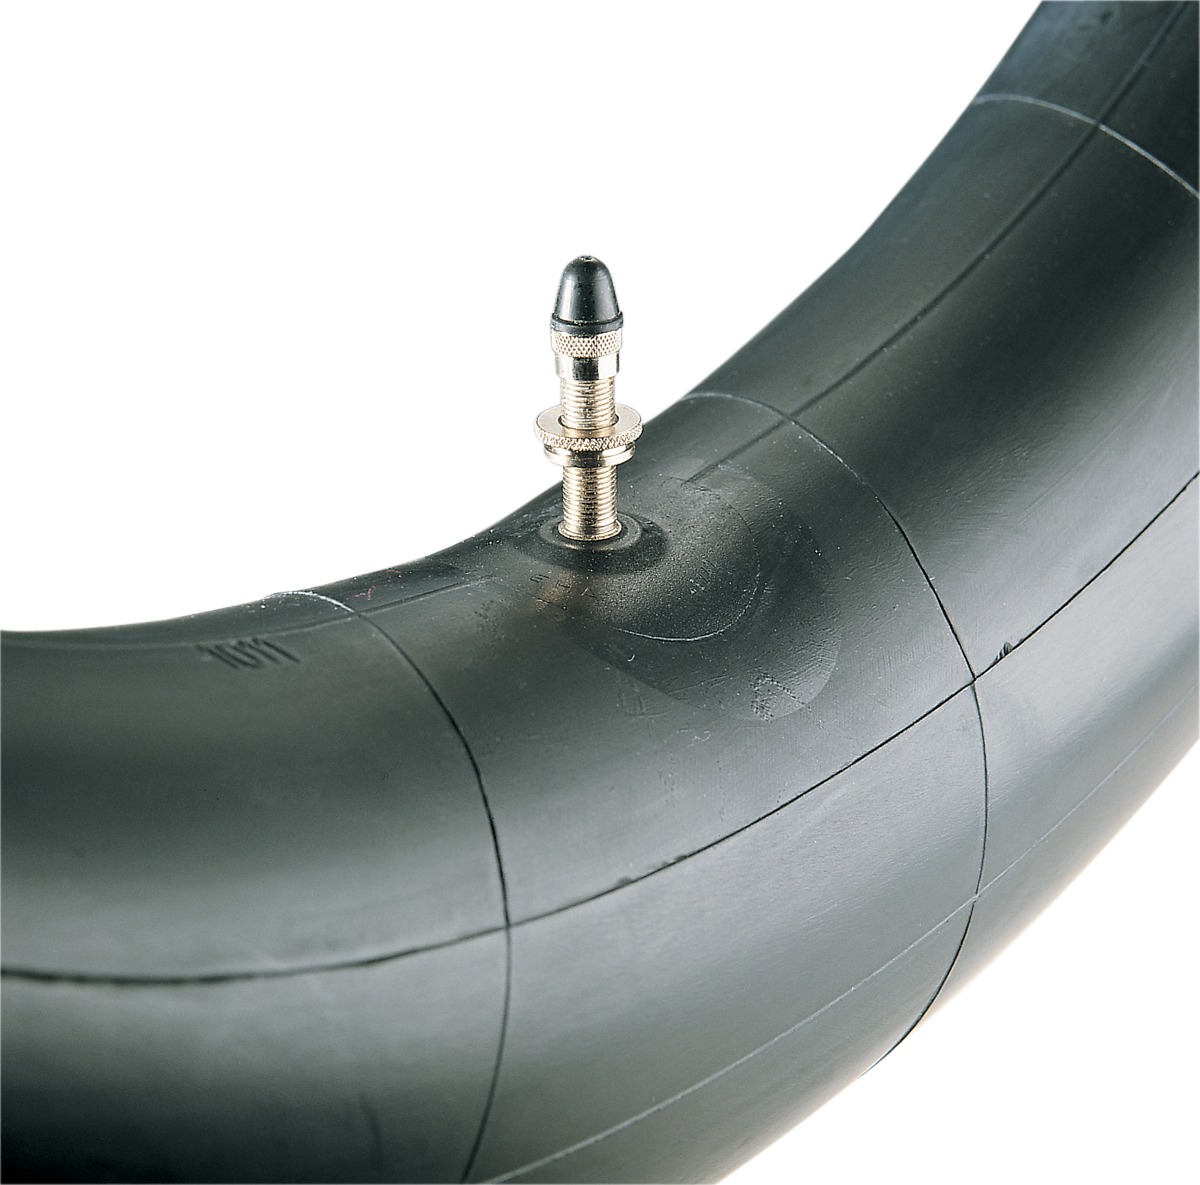 120/60-17 Street Inner Tube - Fits Tire Size: 120/70-17,110/80-17,110/90-17 - Also Fits 120/80-17,110/70-17,4.00-17,4.60-17 - Click Image to Close